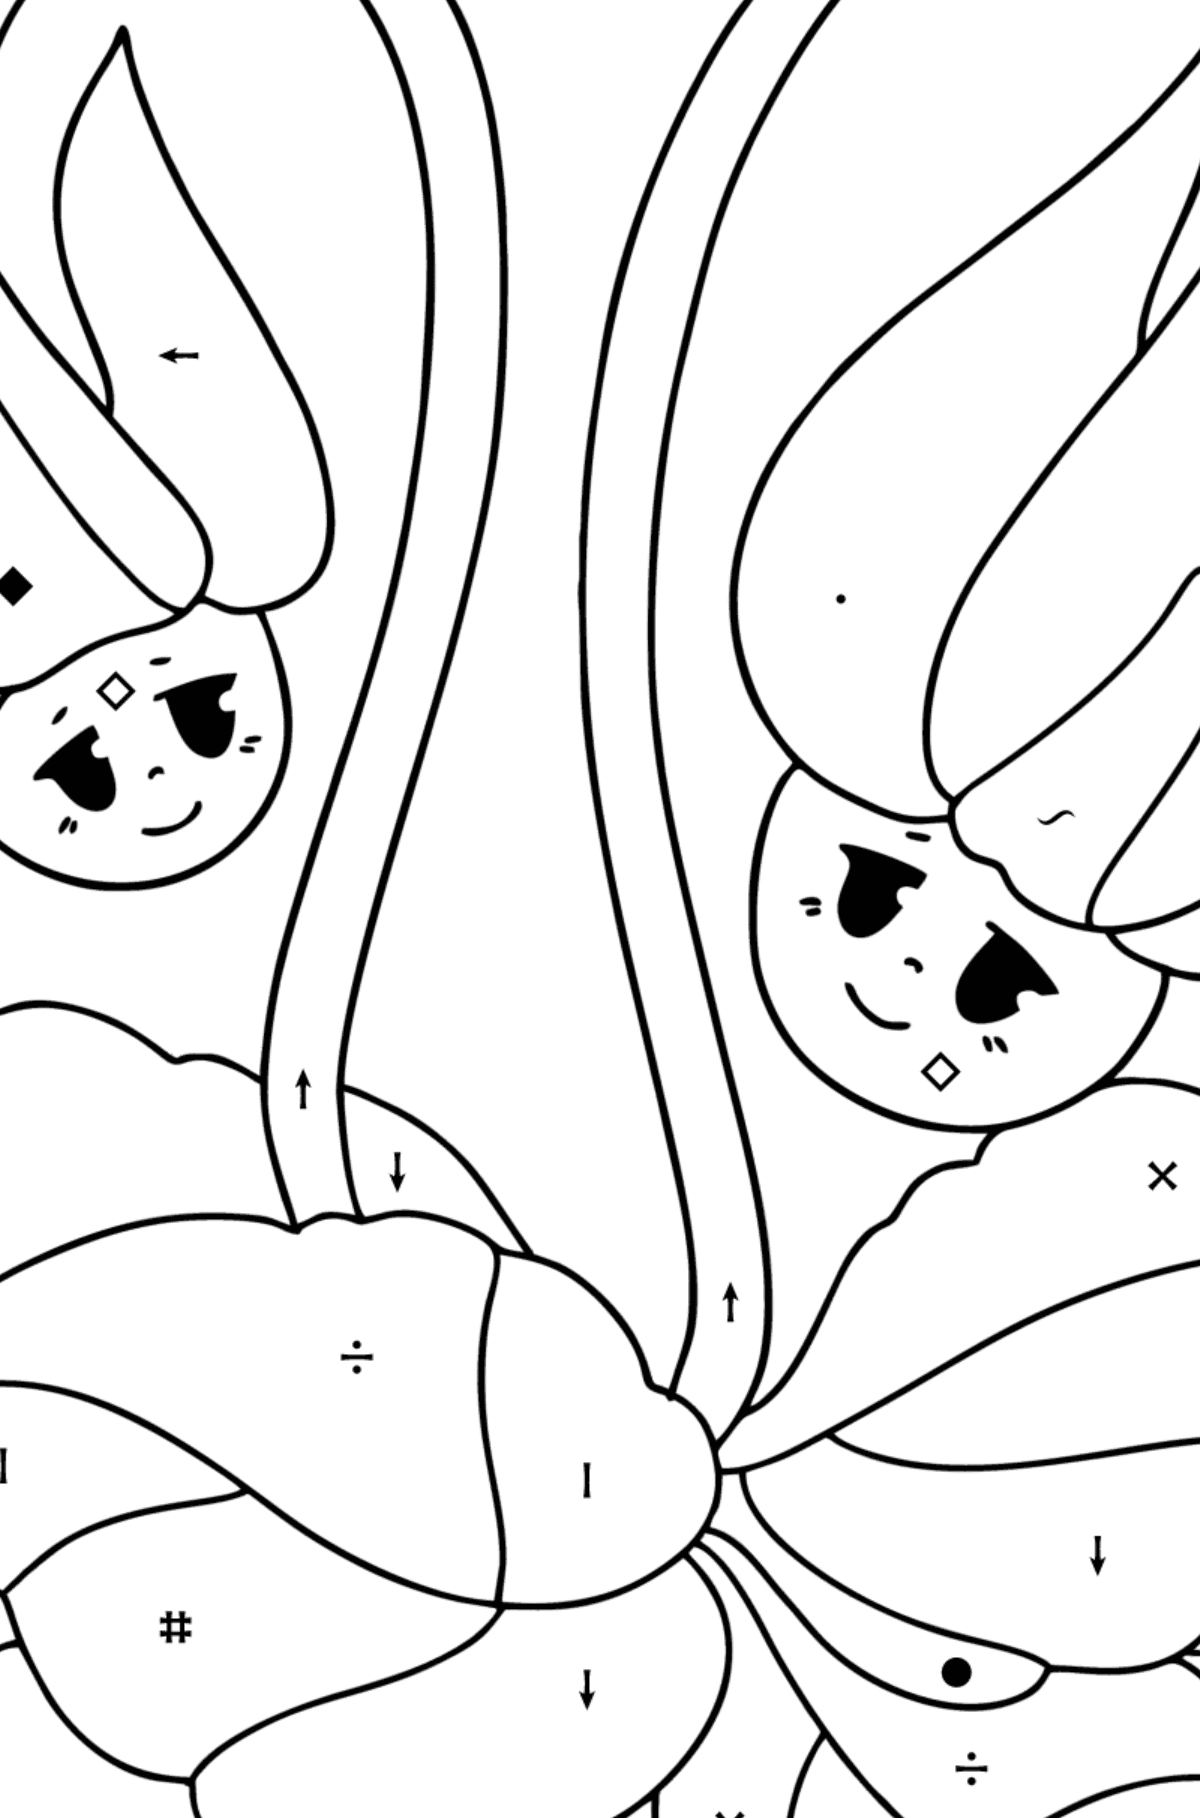 Cyclamen with eyes coloring page - Coloring by Symbols for Kids